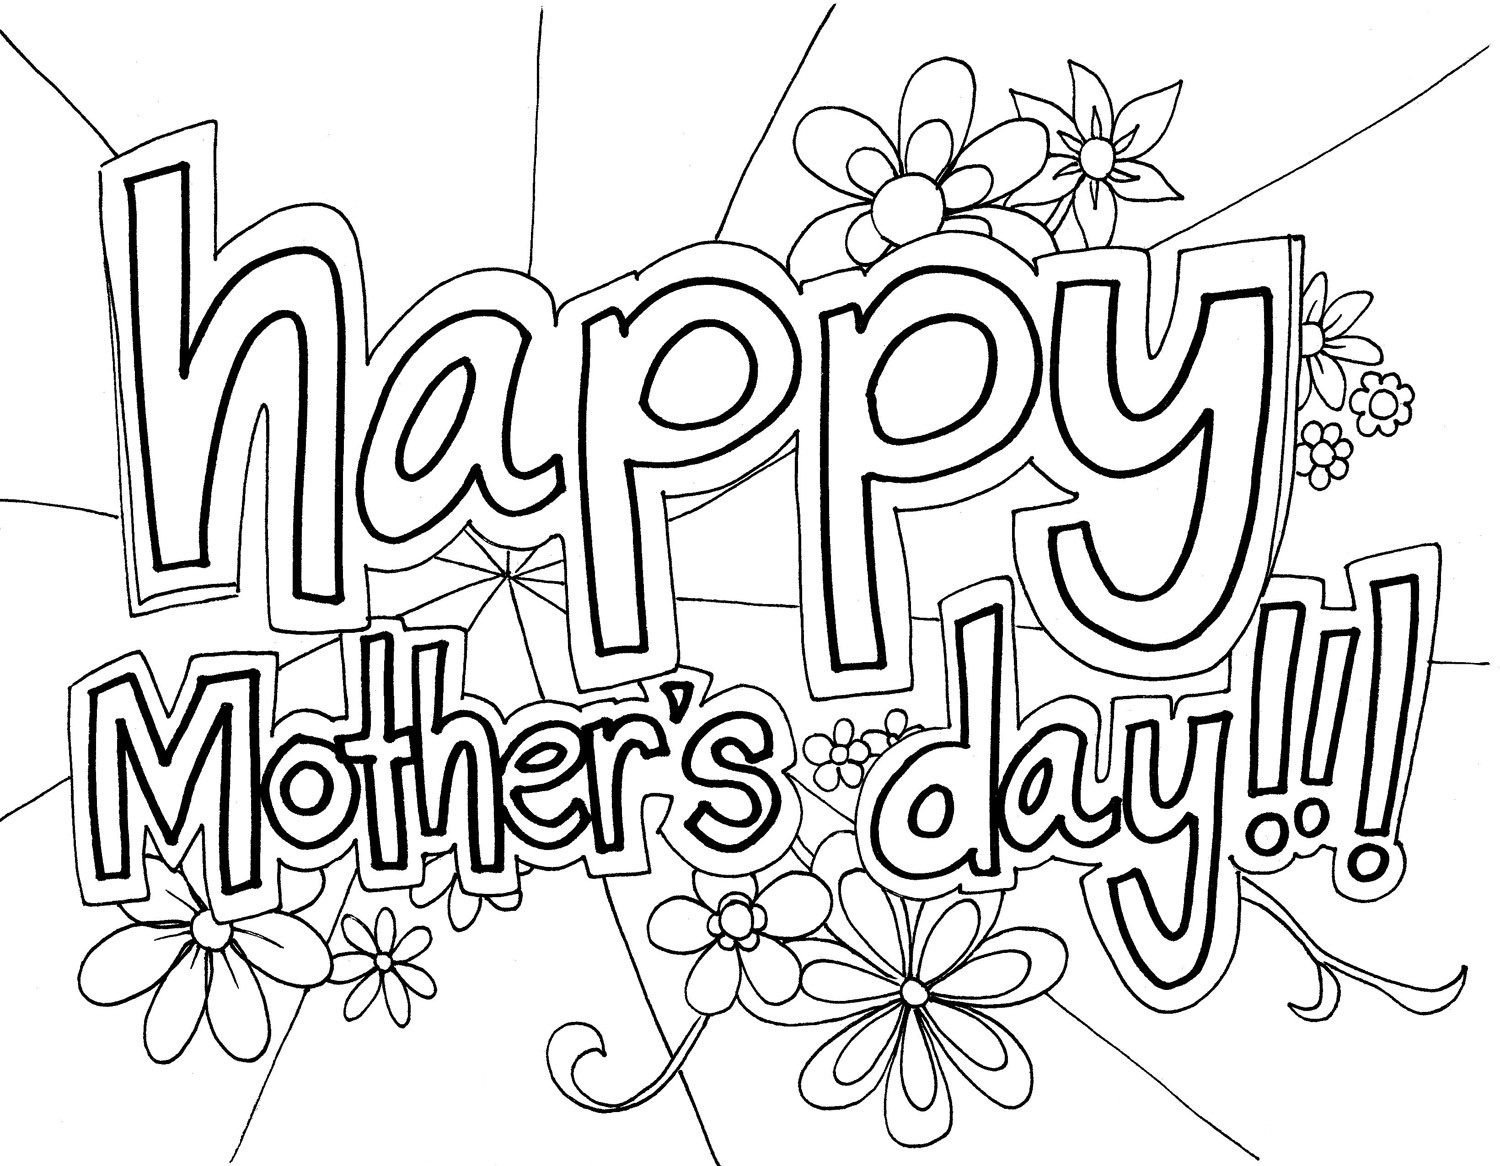 Mothers Day Coloring Sheet
 Free Printable Mothers Day Coloring Pages For Kids